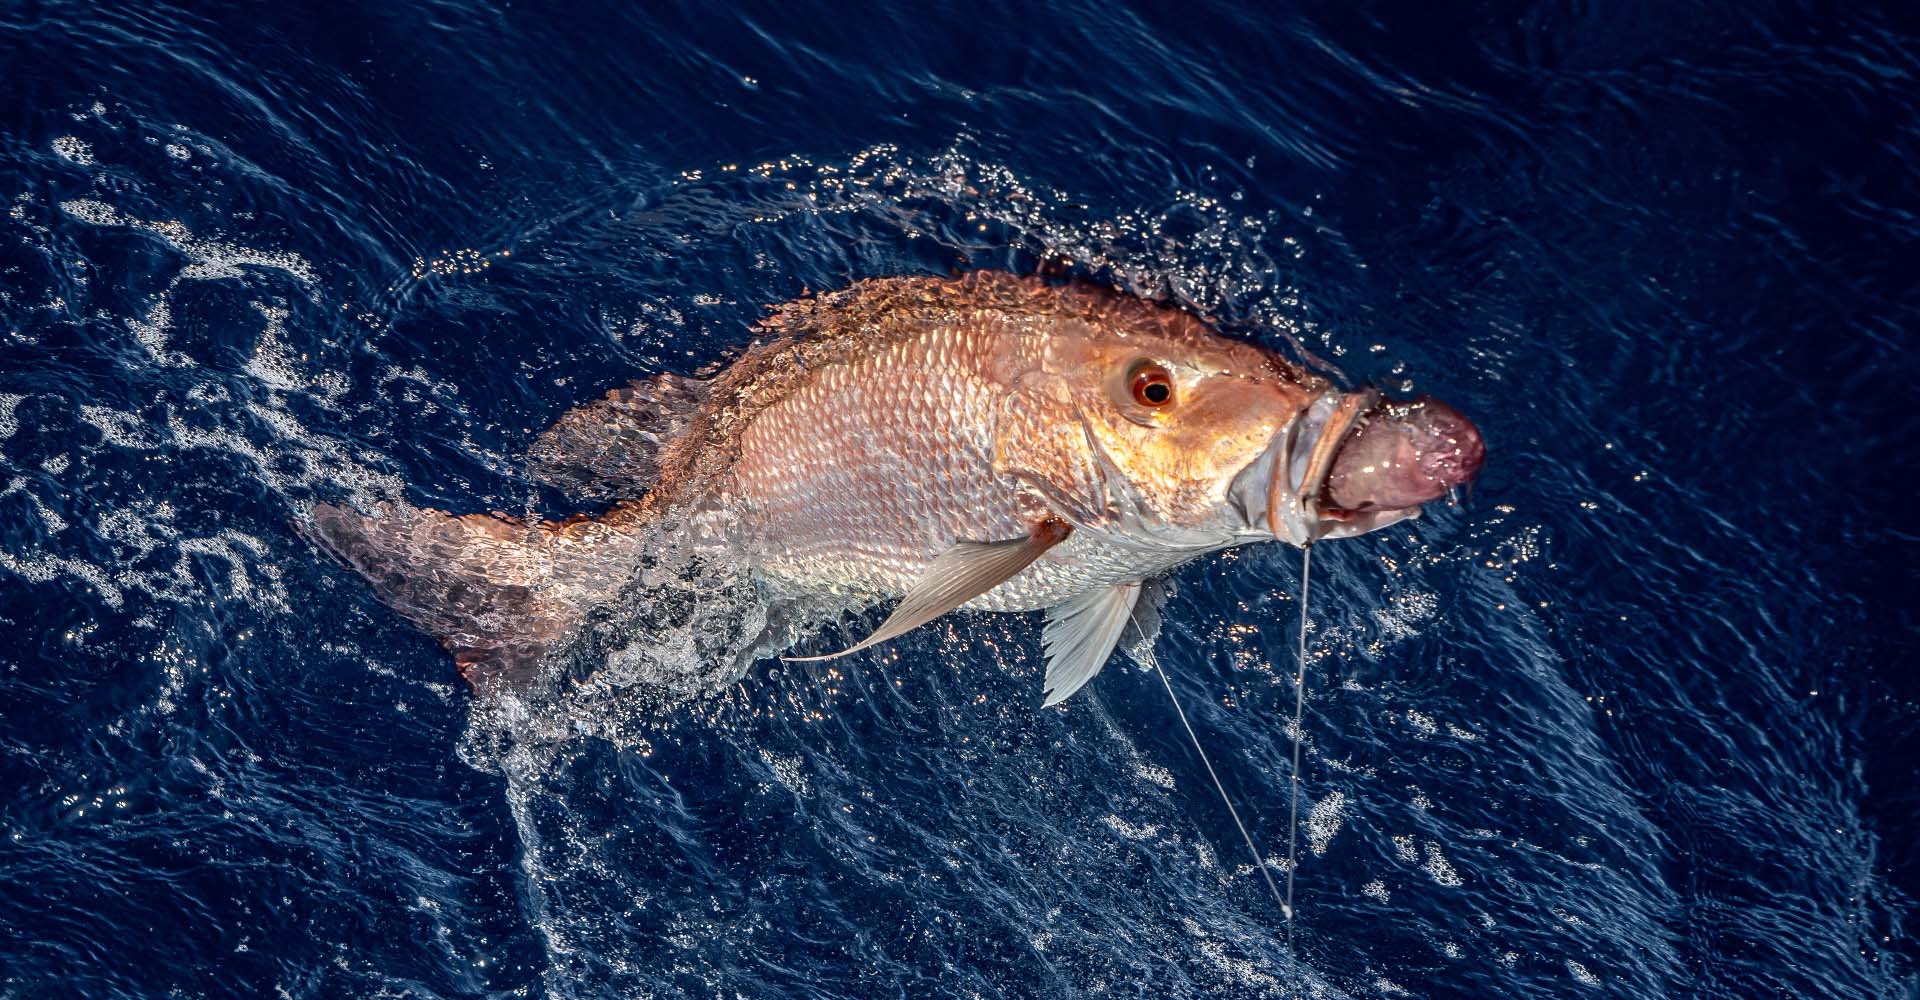 Red snapper at the surface of the water with signs of barotrauma including stomach protruding from its mouth